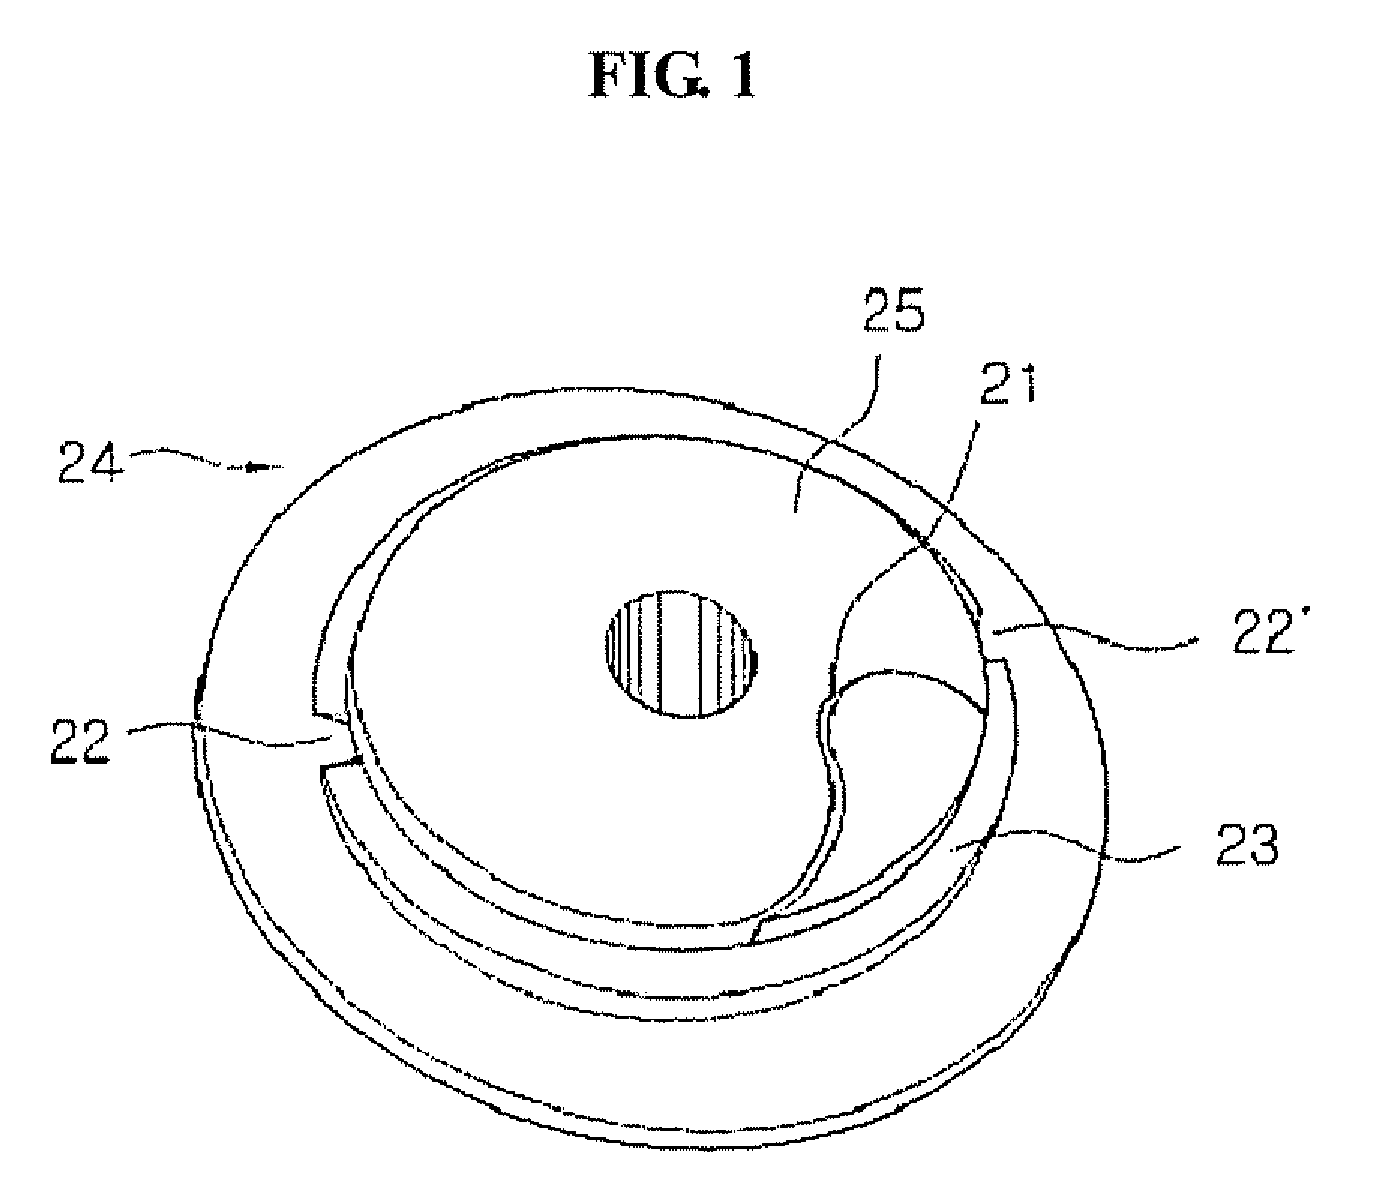 Fault current limiter having superconducting bypass reactor for simultaneous quenching